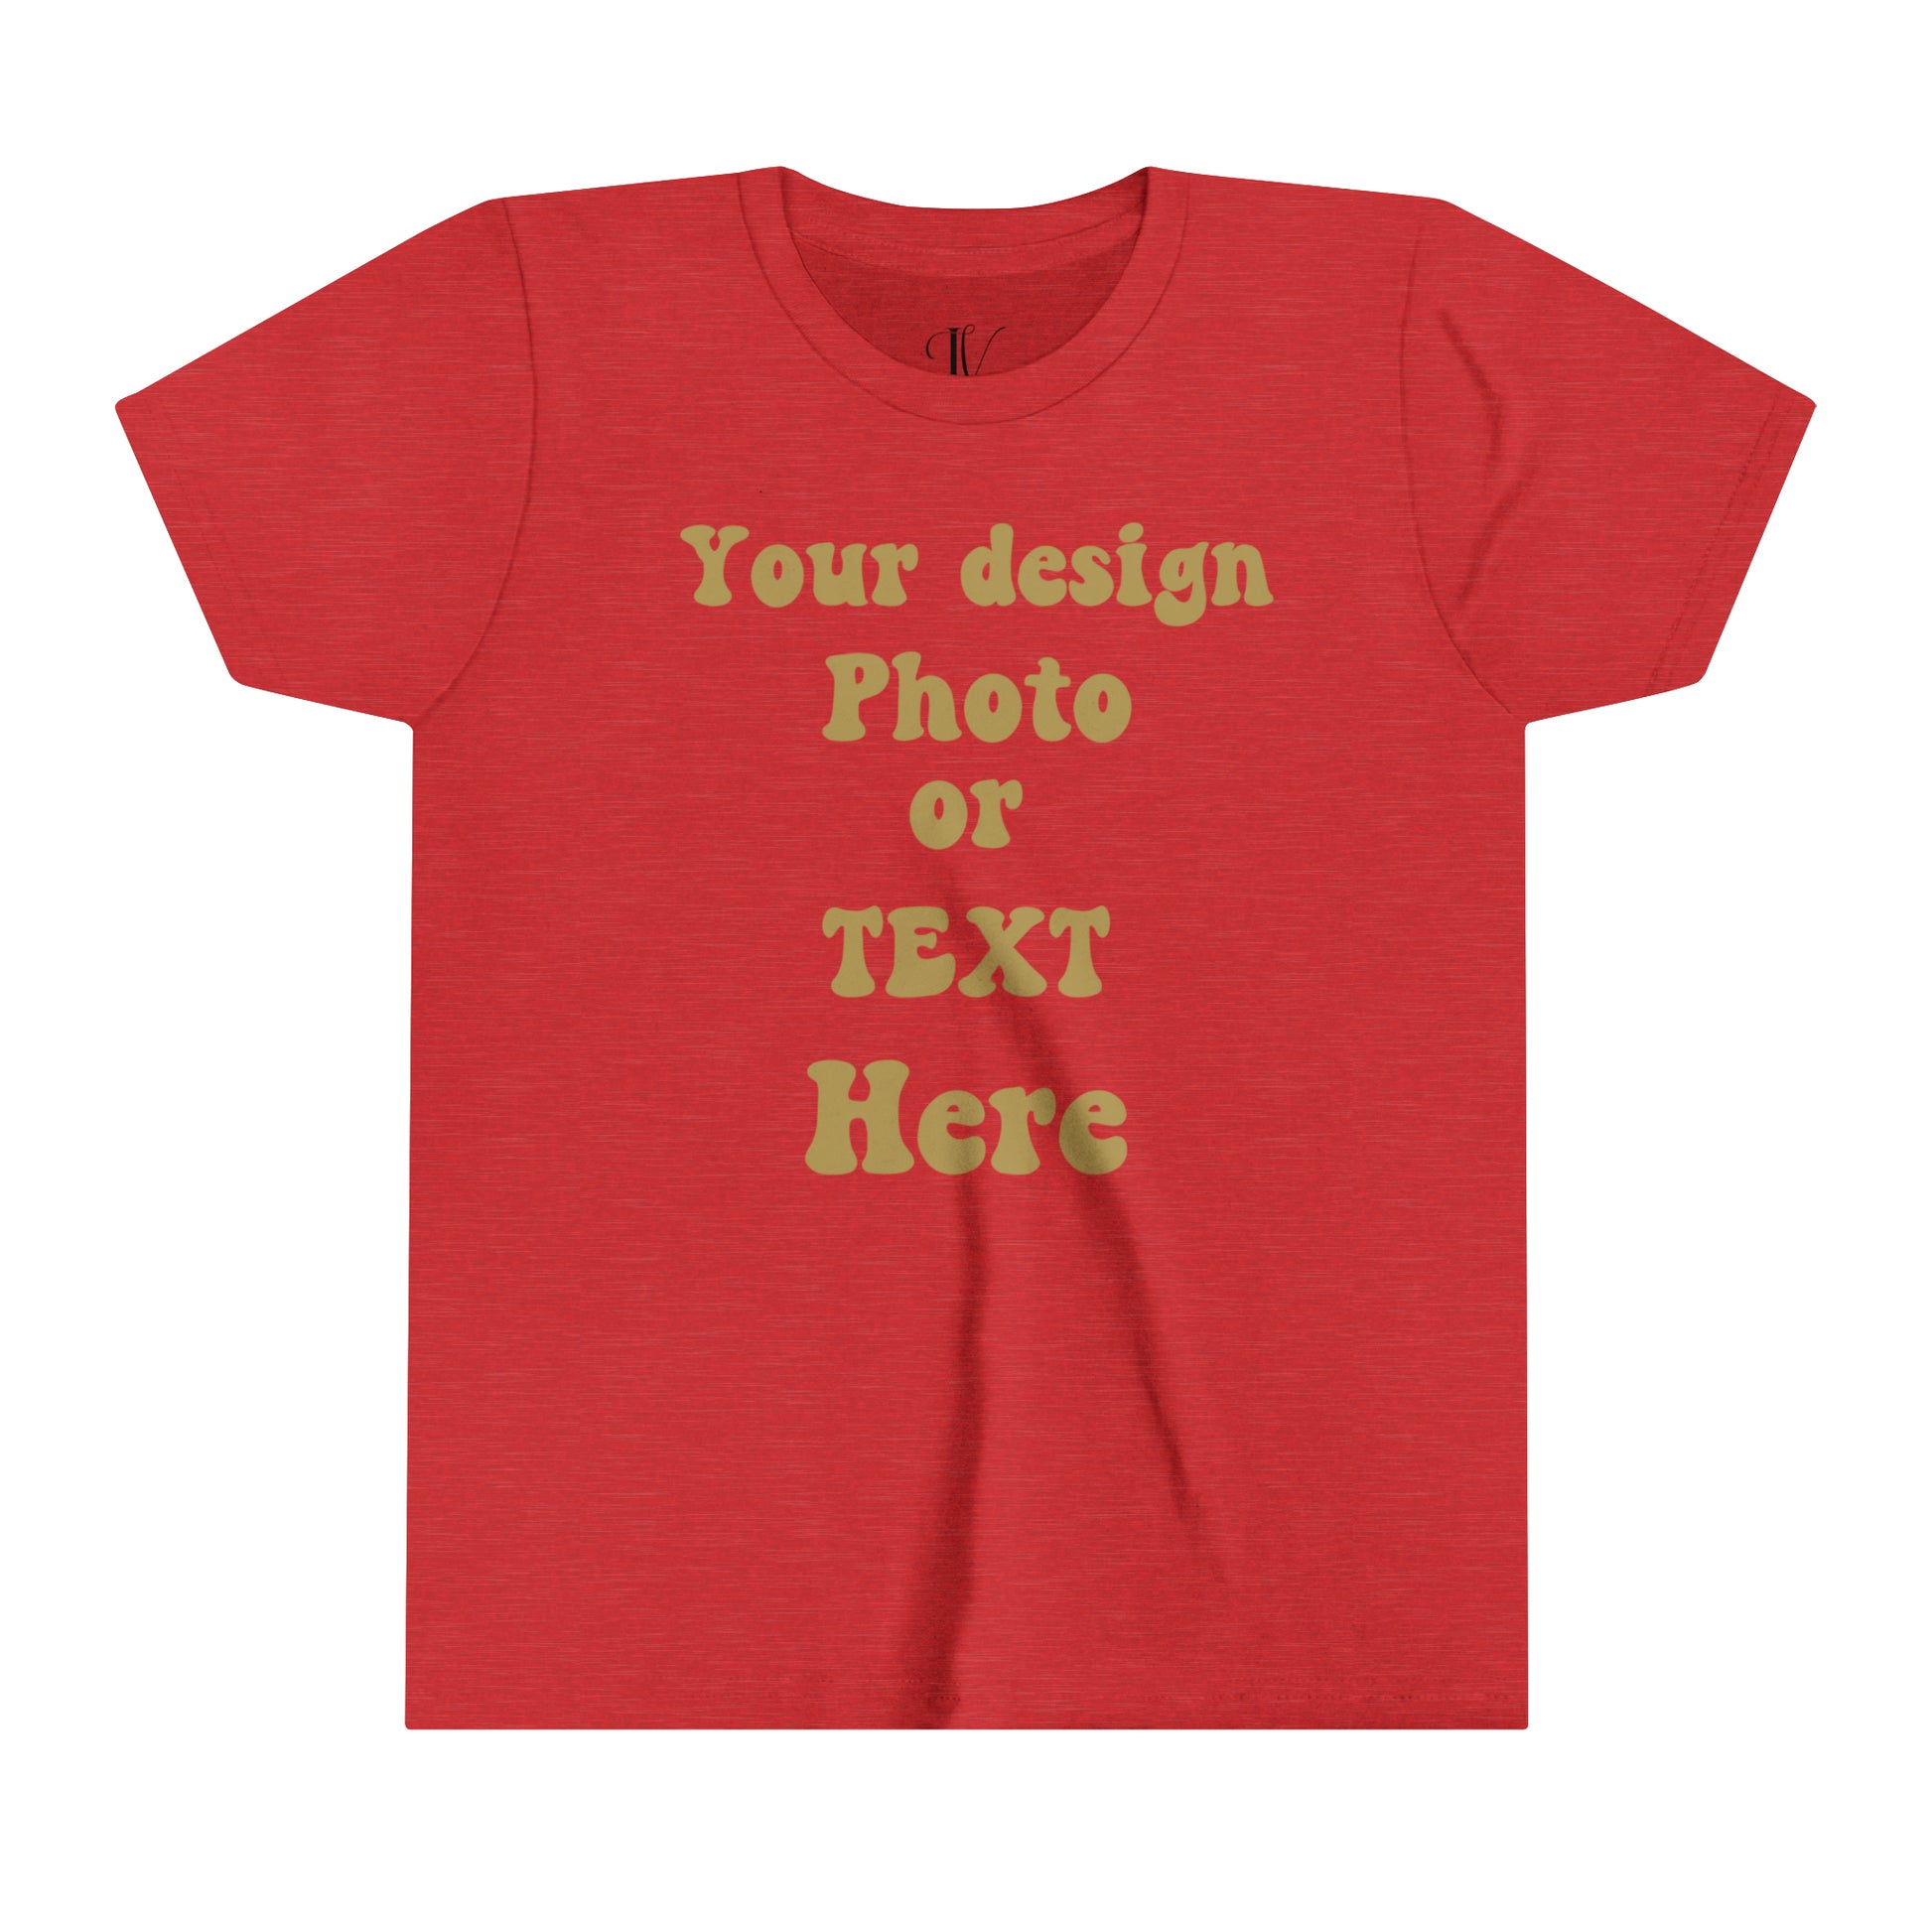 Youth Short Sleeve Tee - Personalized with Your Photo, Text, and Design Kids clothes Heather Red S 